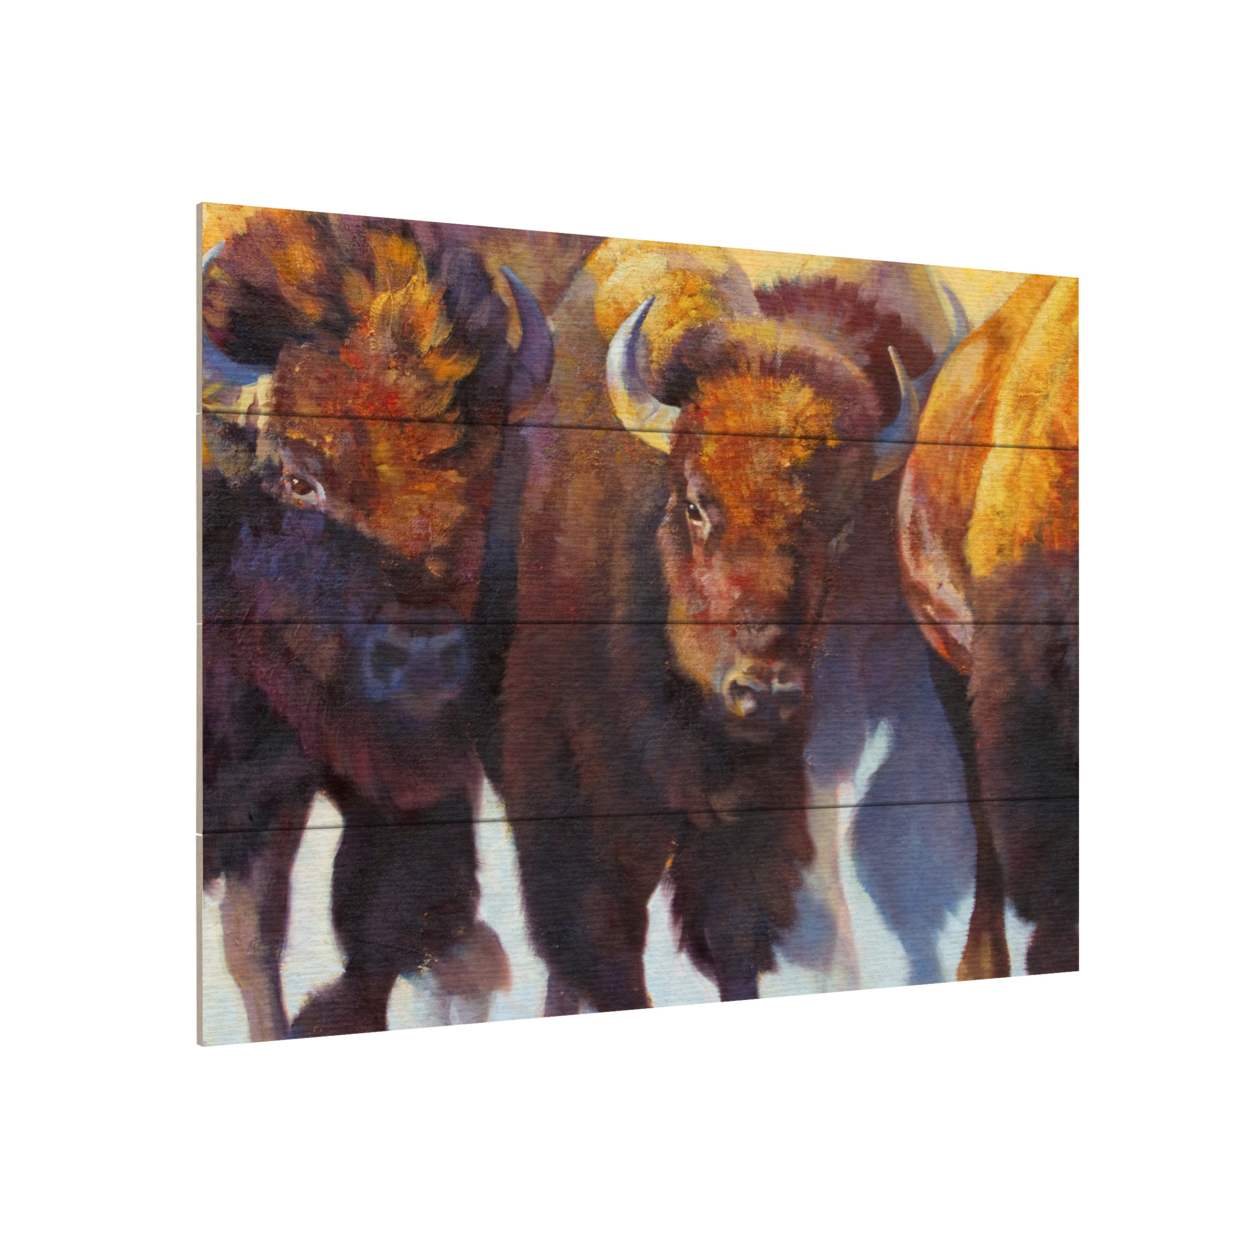 Wall Art 12 X 16 Inches Titled Wall Of Thunder Ready To Hang Printed On Wooden Planks